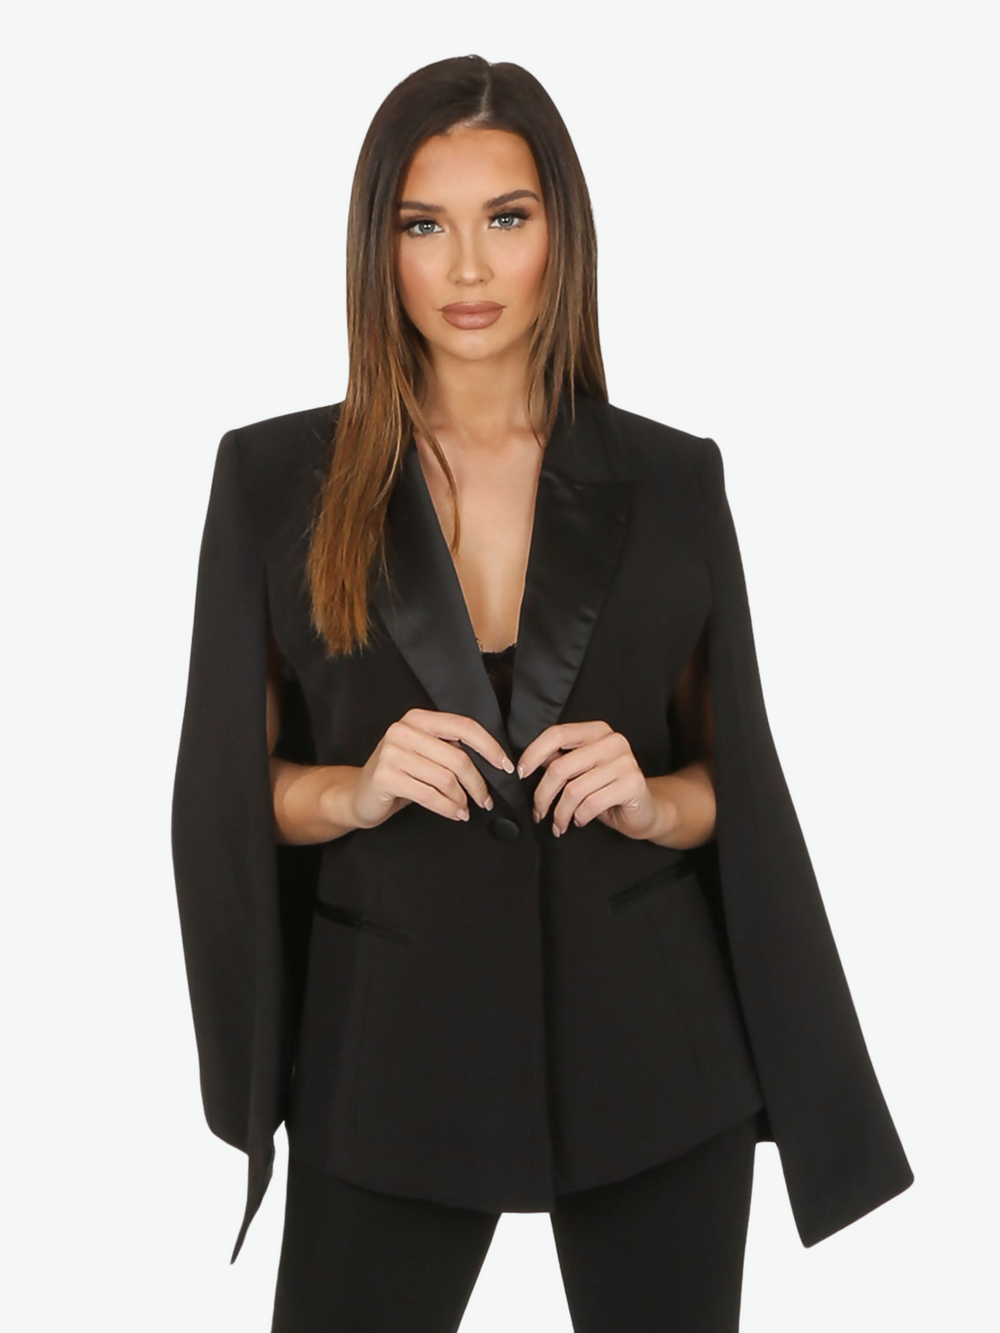 Model wears black cape blazer with side split and black satin lapel. The blazer has front button fastening.  Model places both her hands in front, touching the black satin lapel. 